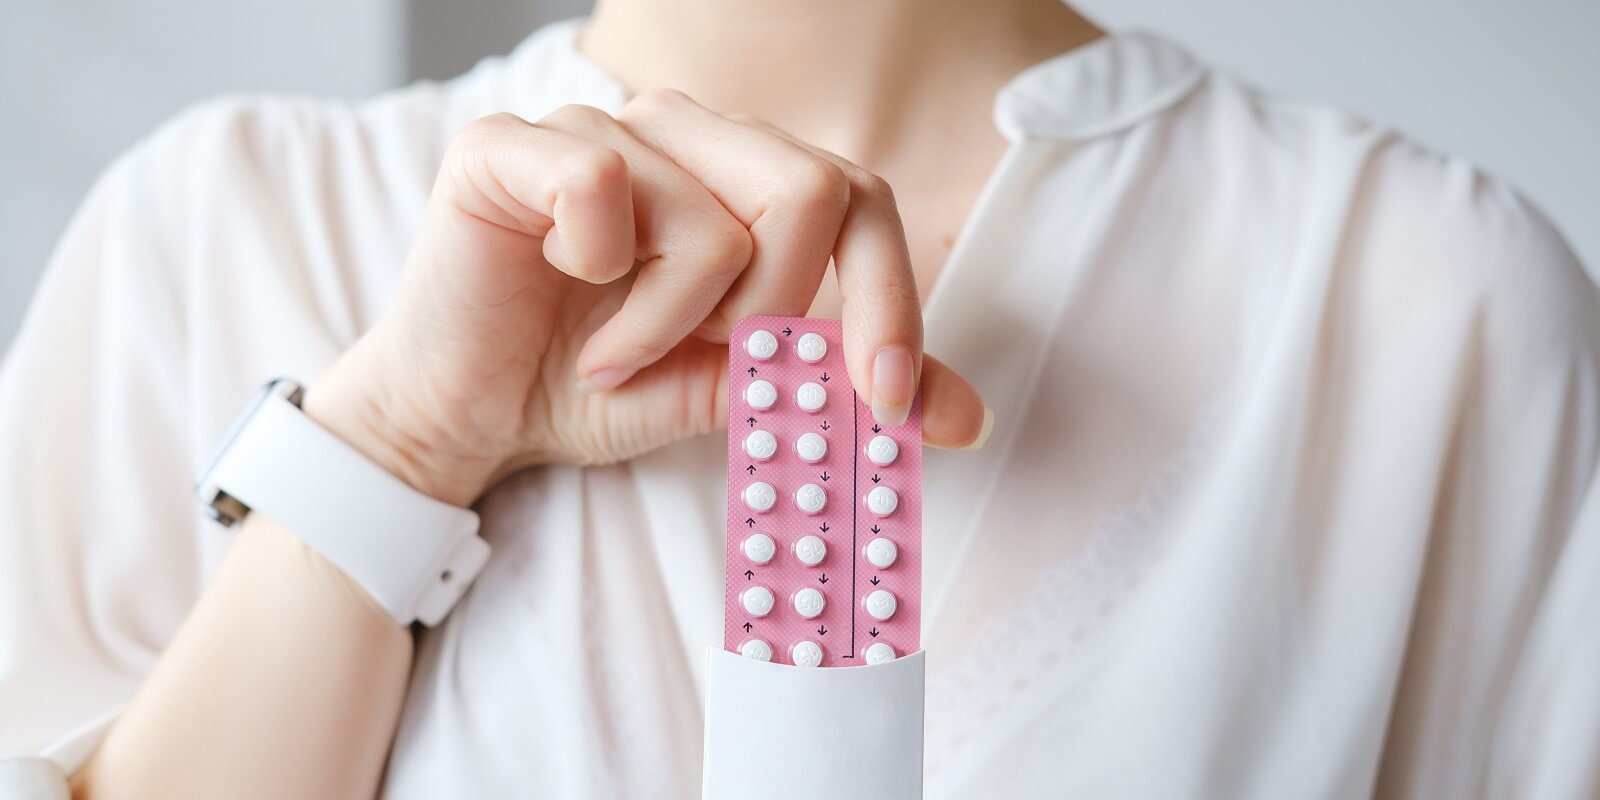 woman in white blouse holding hormonal oral contraceptives in a pink blister